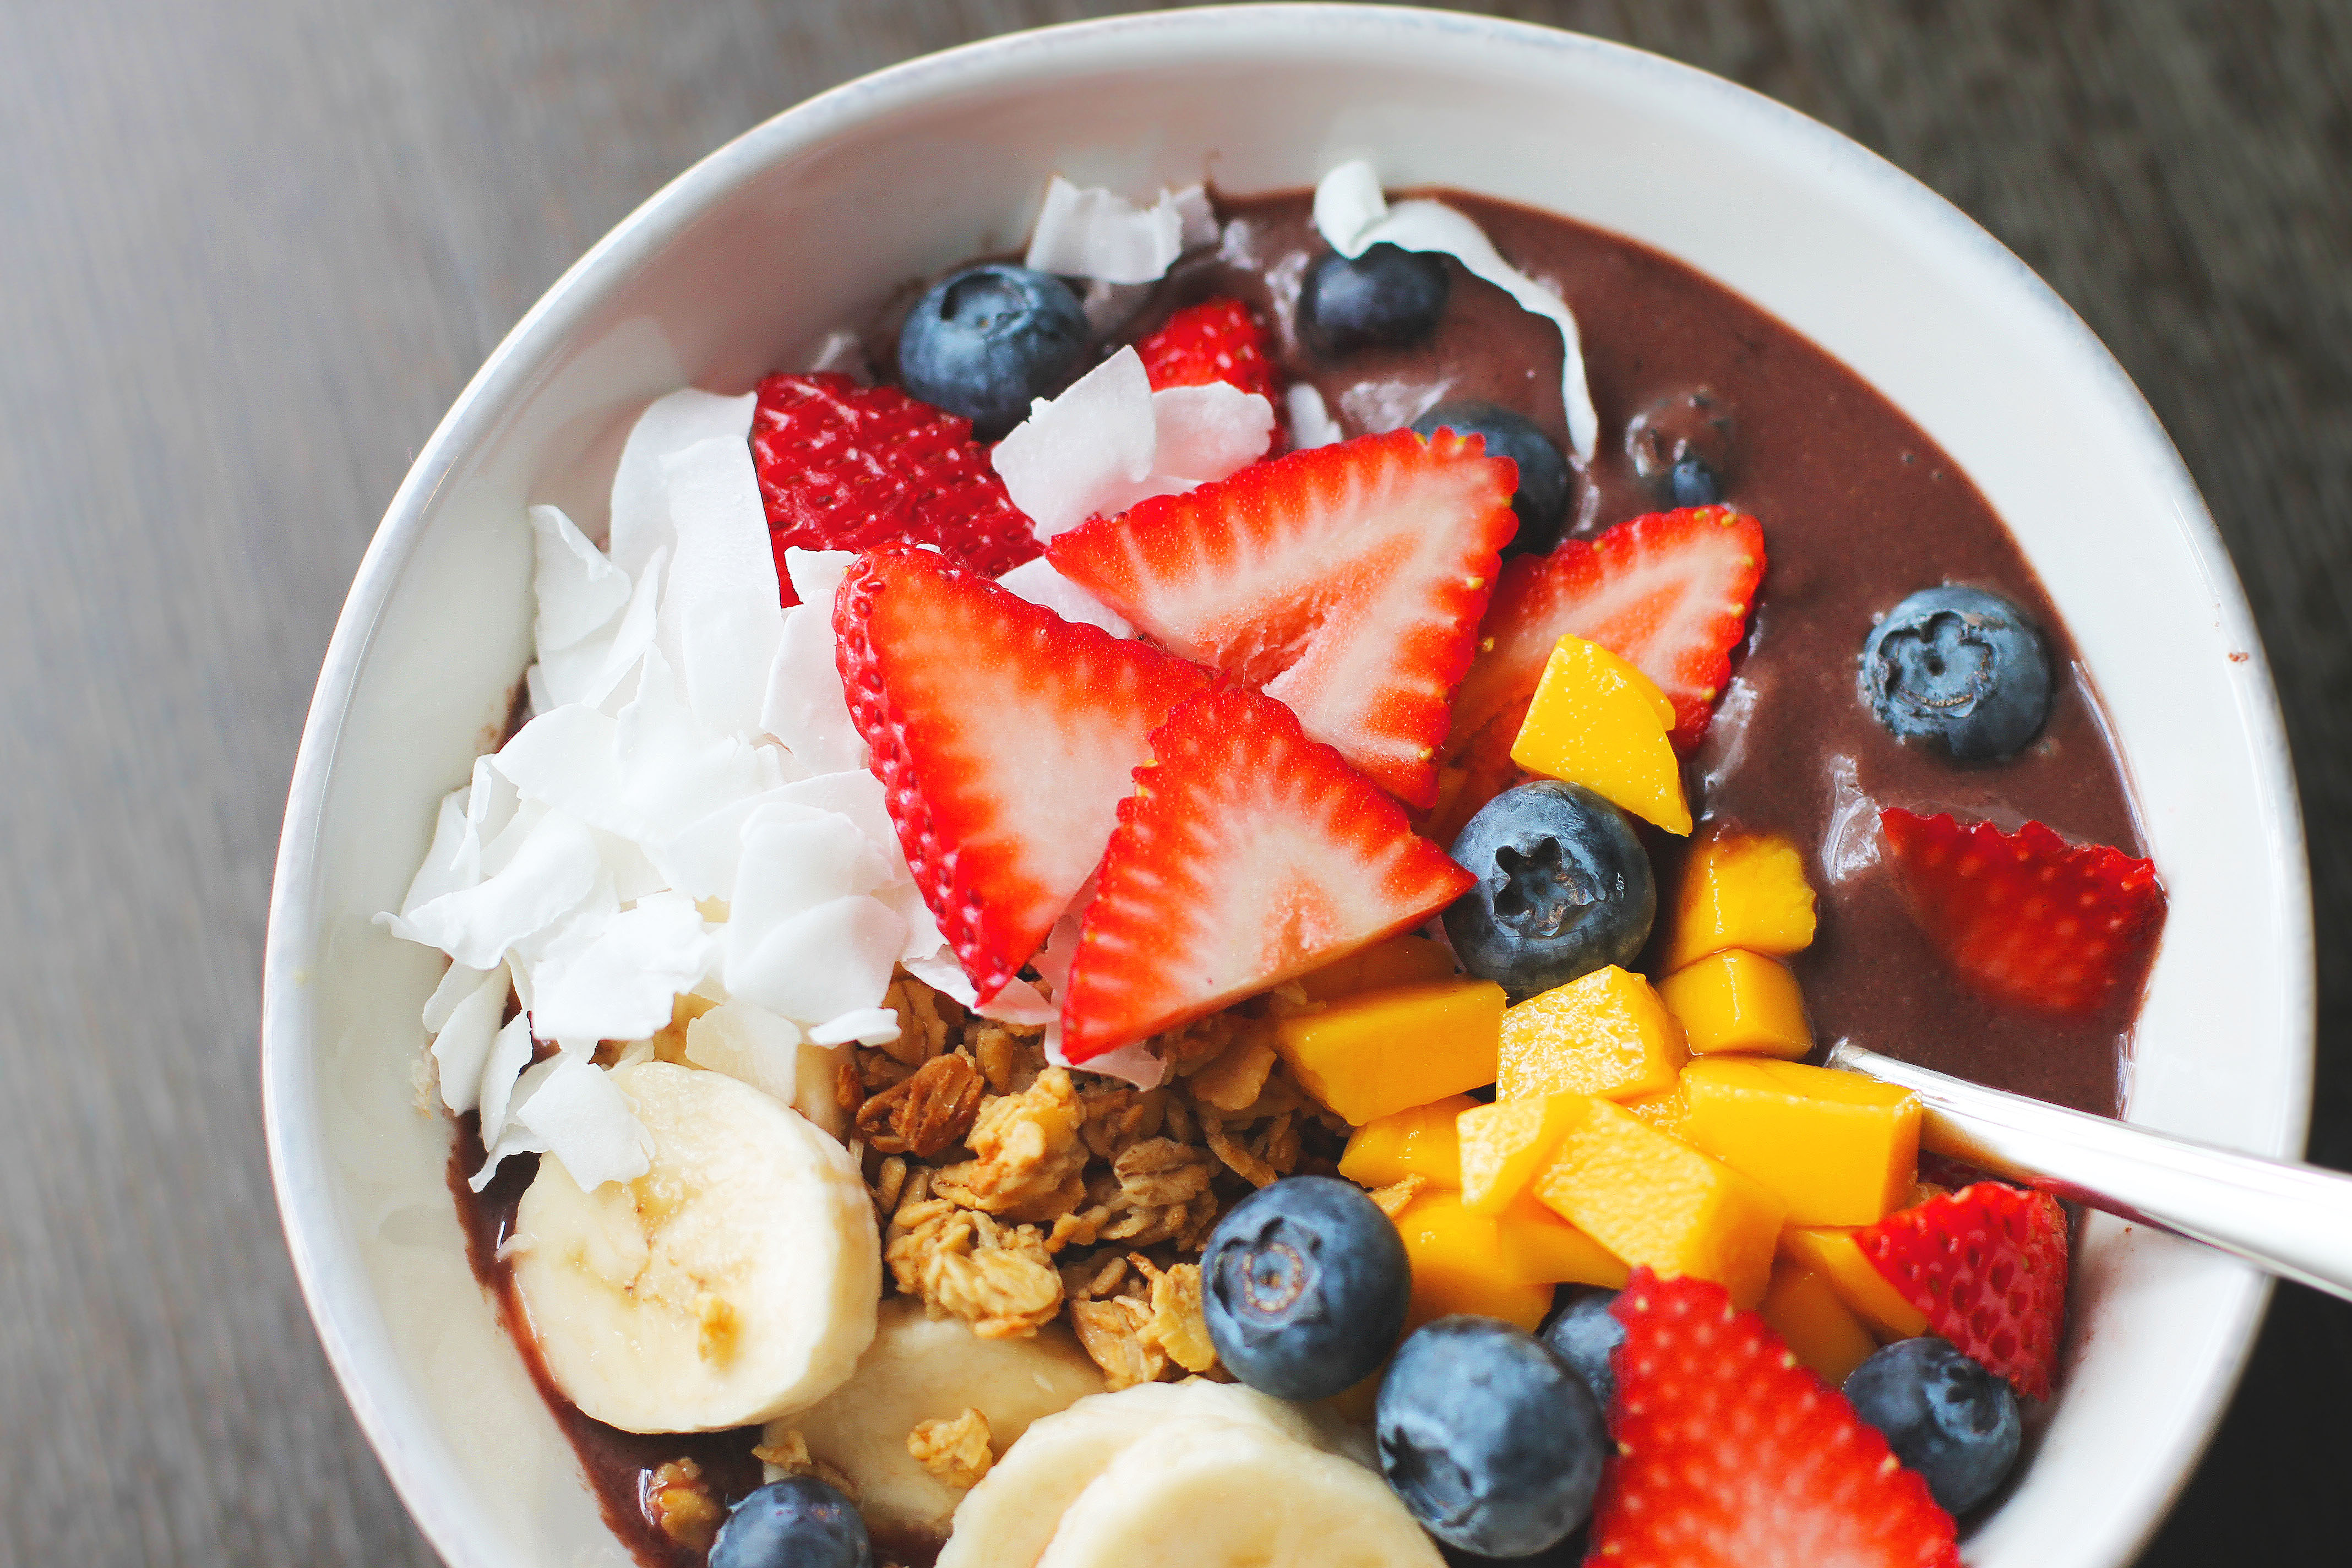 Enjoy A Healthy Treat At The Top Acai Bowl Places In Jersey!